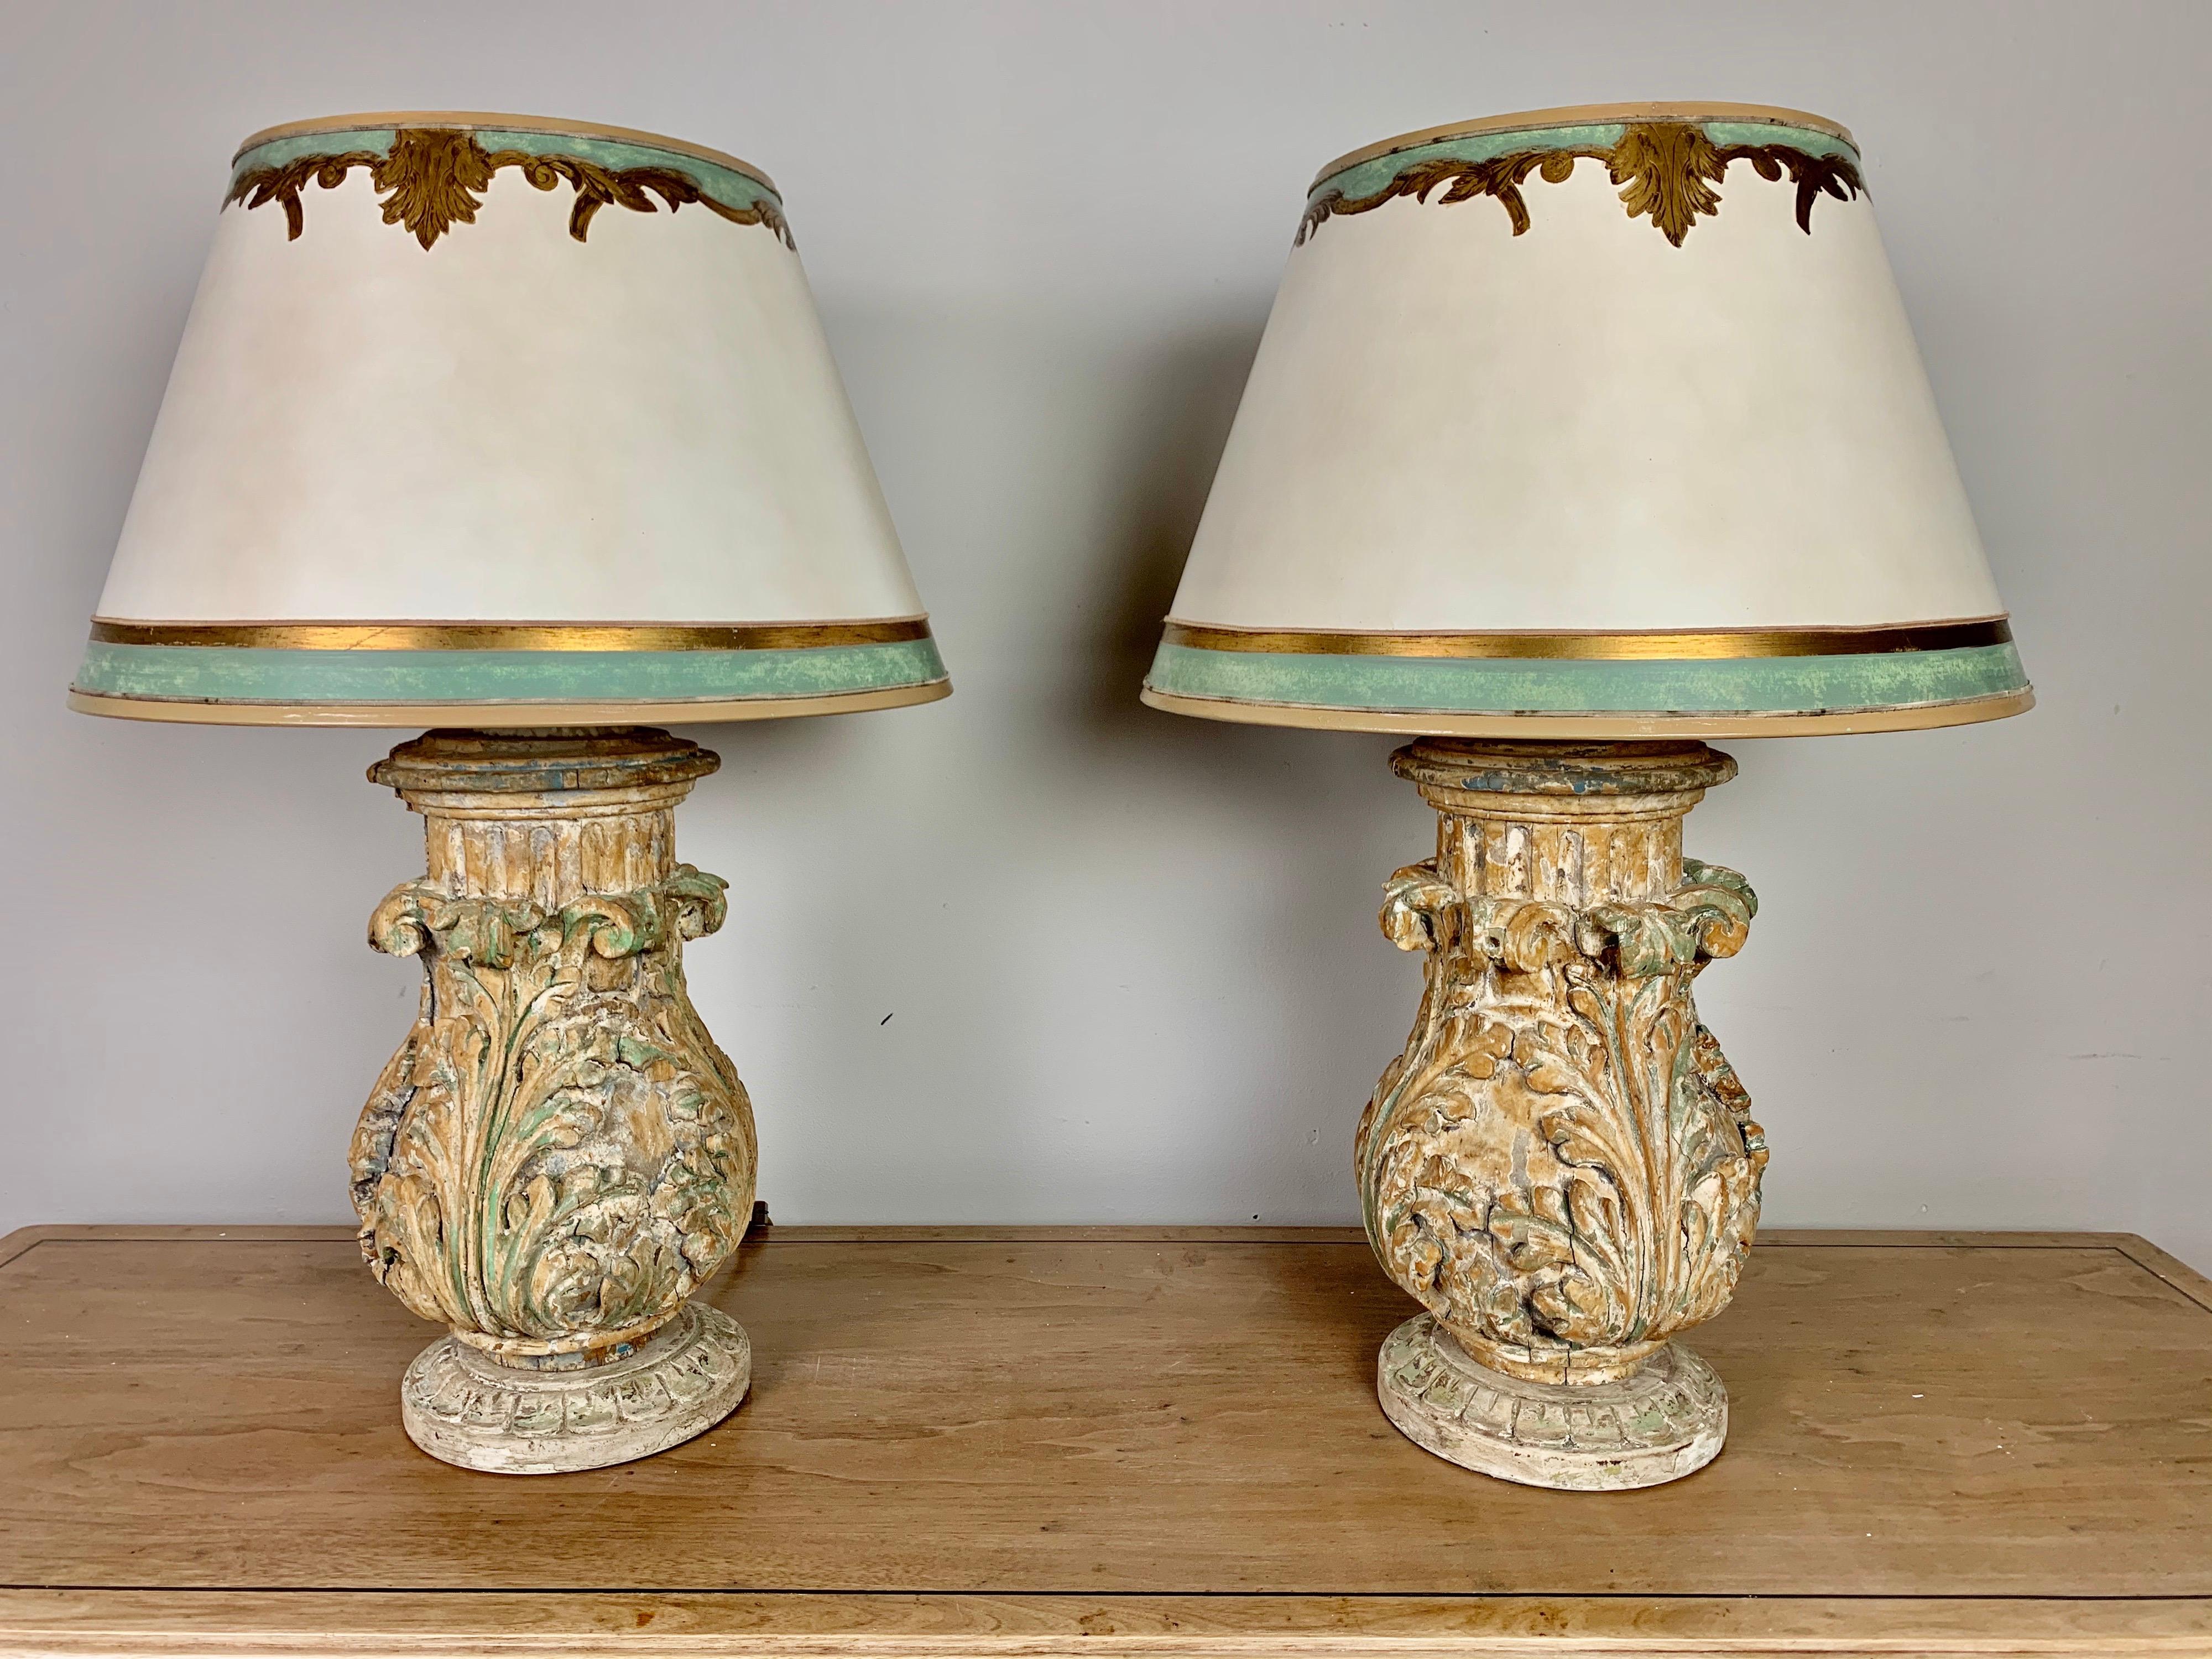 Pair of custom lamps made with 19th century hand carved acanthus leaf carvings mounted into lamps. The lamps are crowned with custom hand painted parchment shades that match to perfection. The lamps are newly wired and ready to plug in.